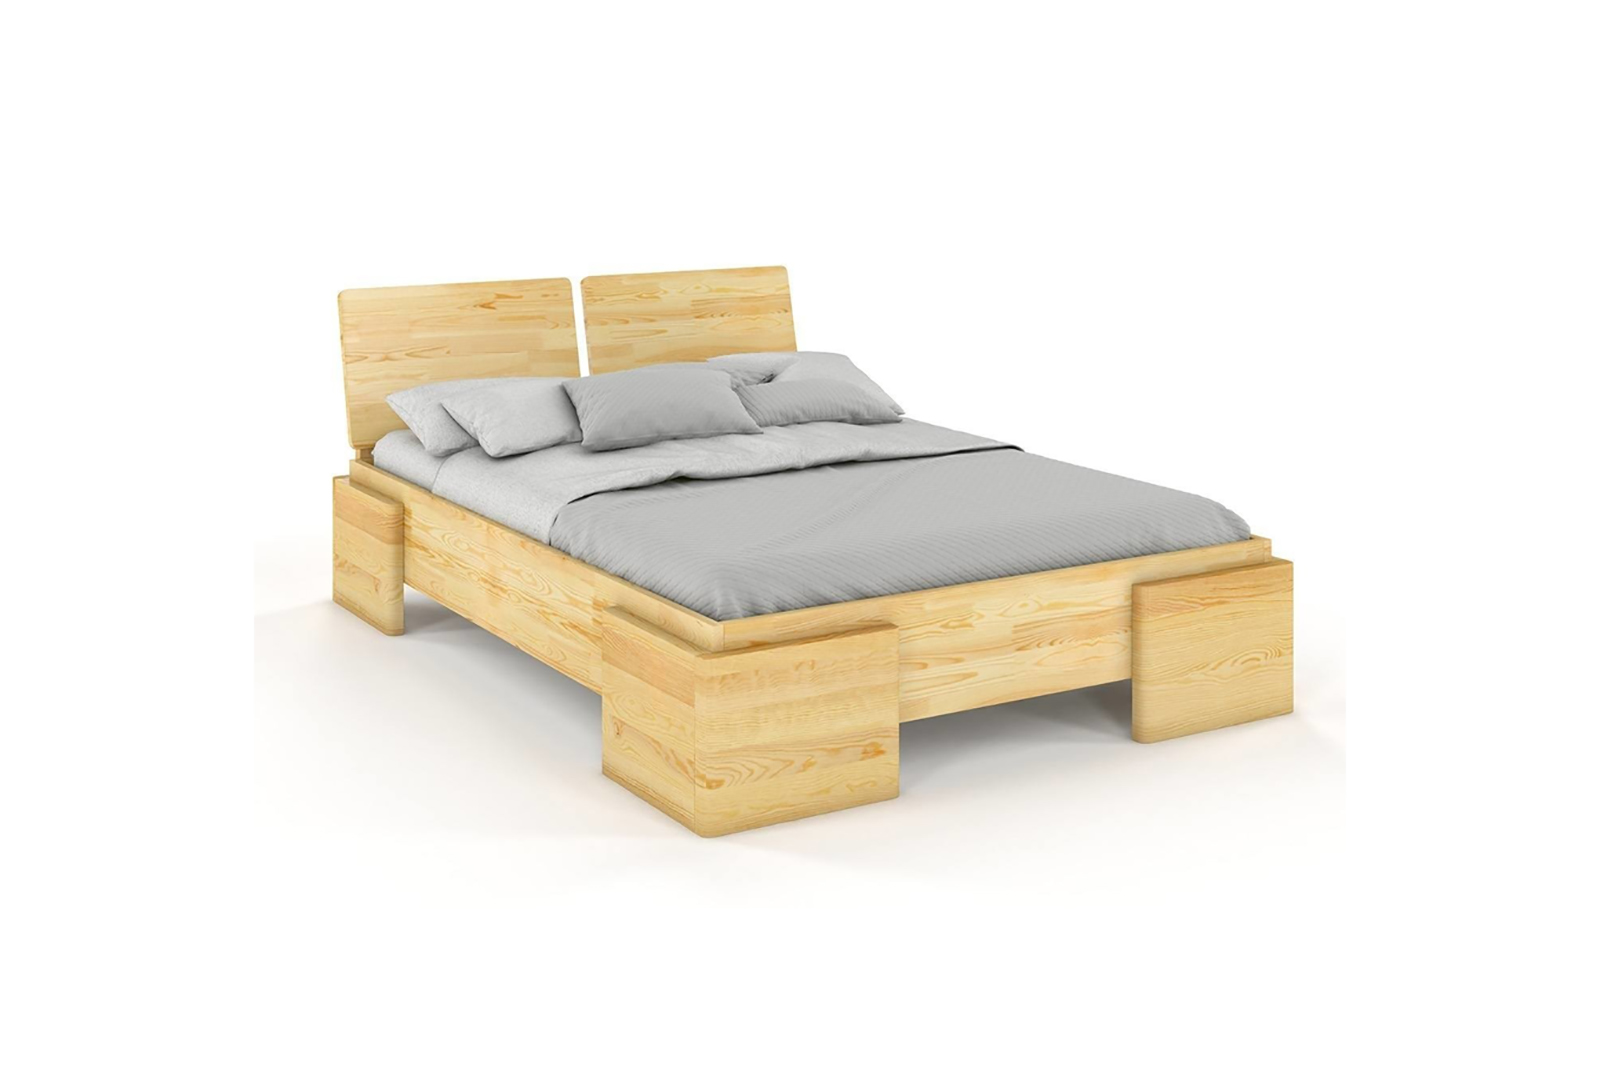 VISBY ARGENTO HIGH PINE BED 3